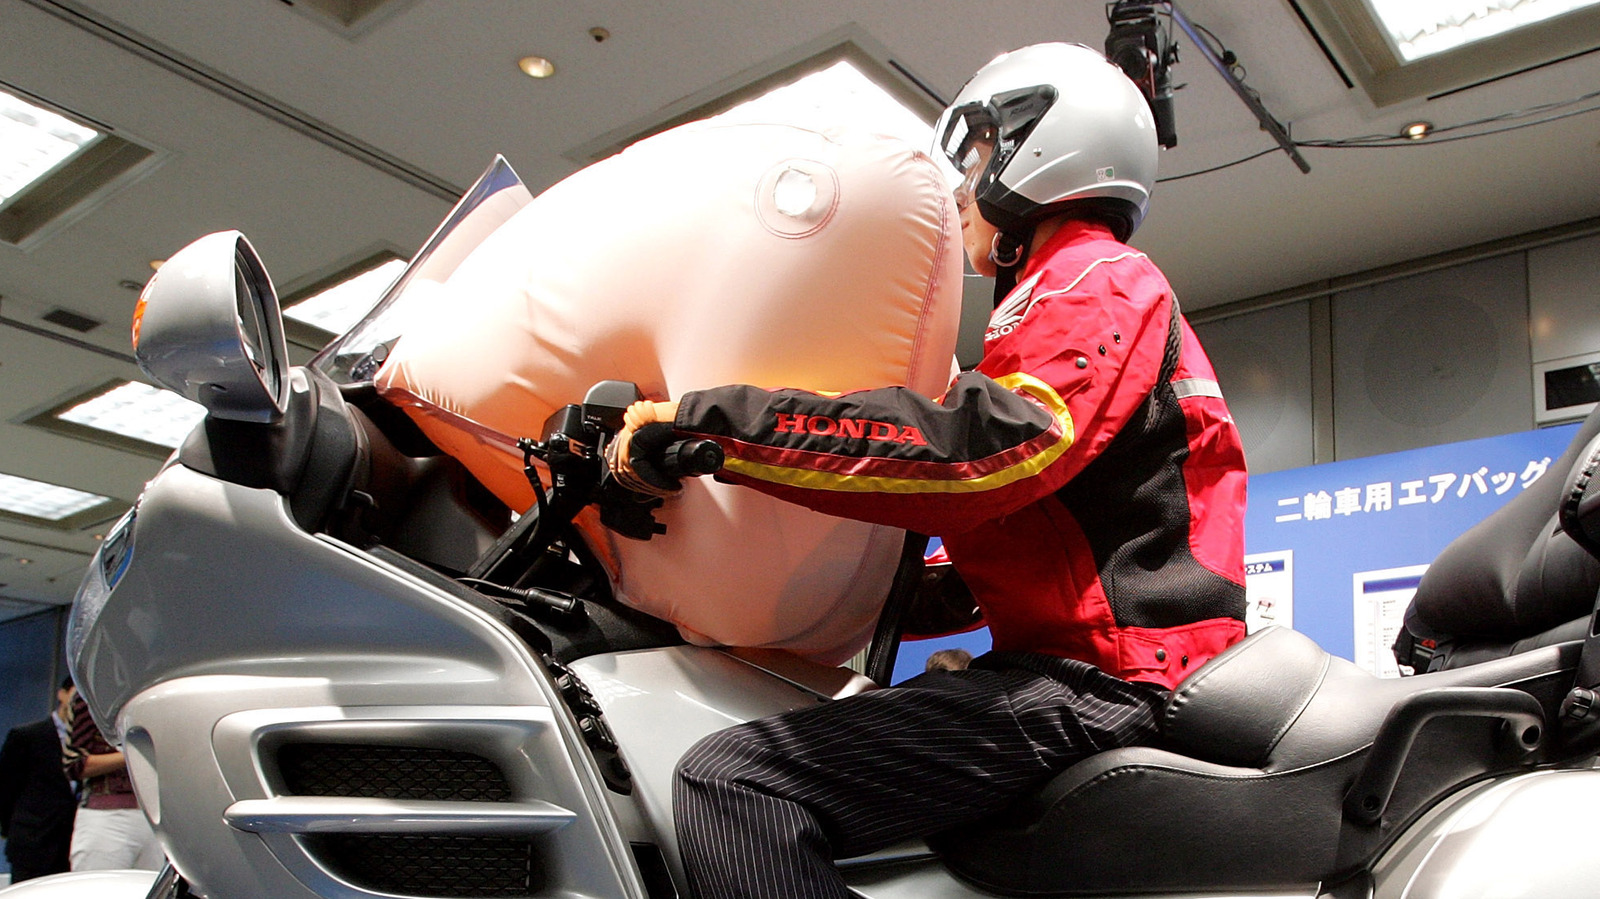 Motorcycle Airbag Vests-Safety of the riders